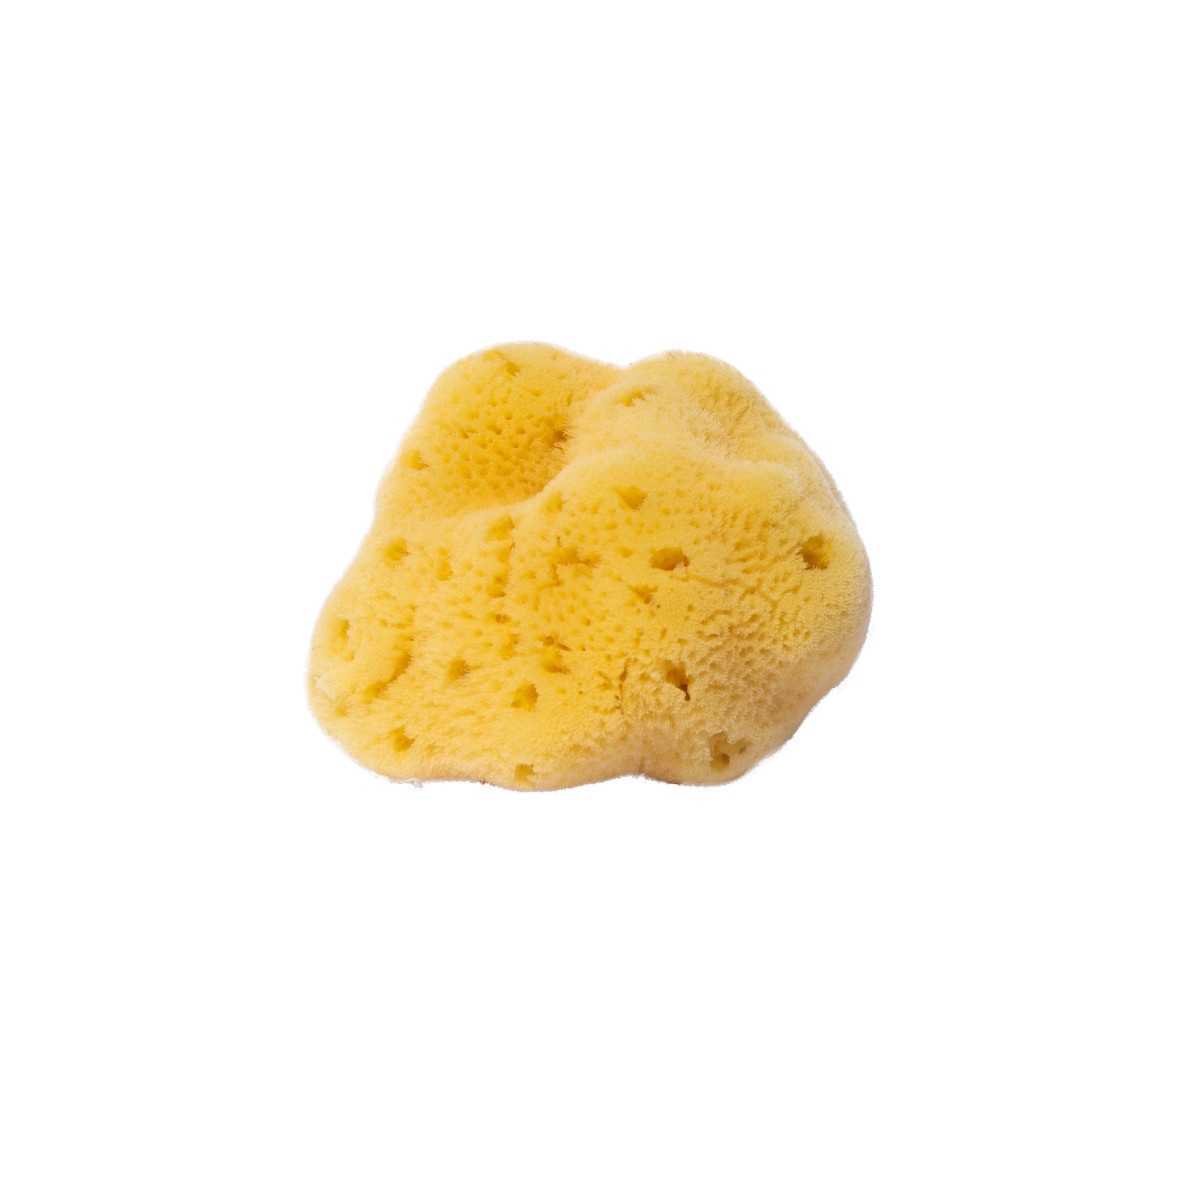 Natural vegetable sponge from the sea